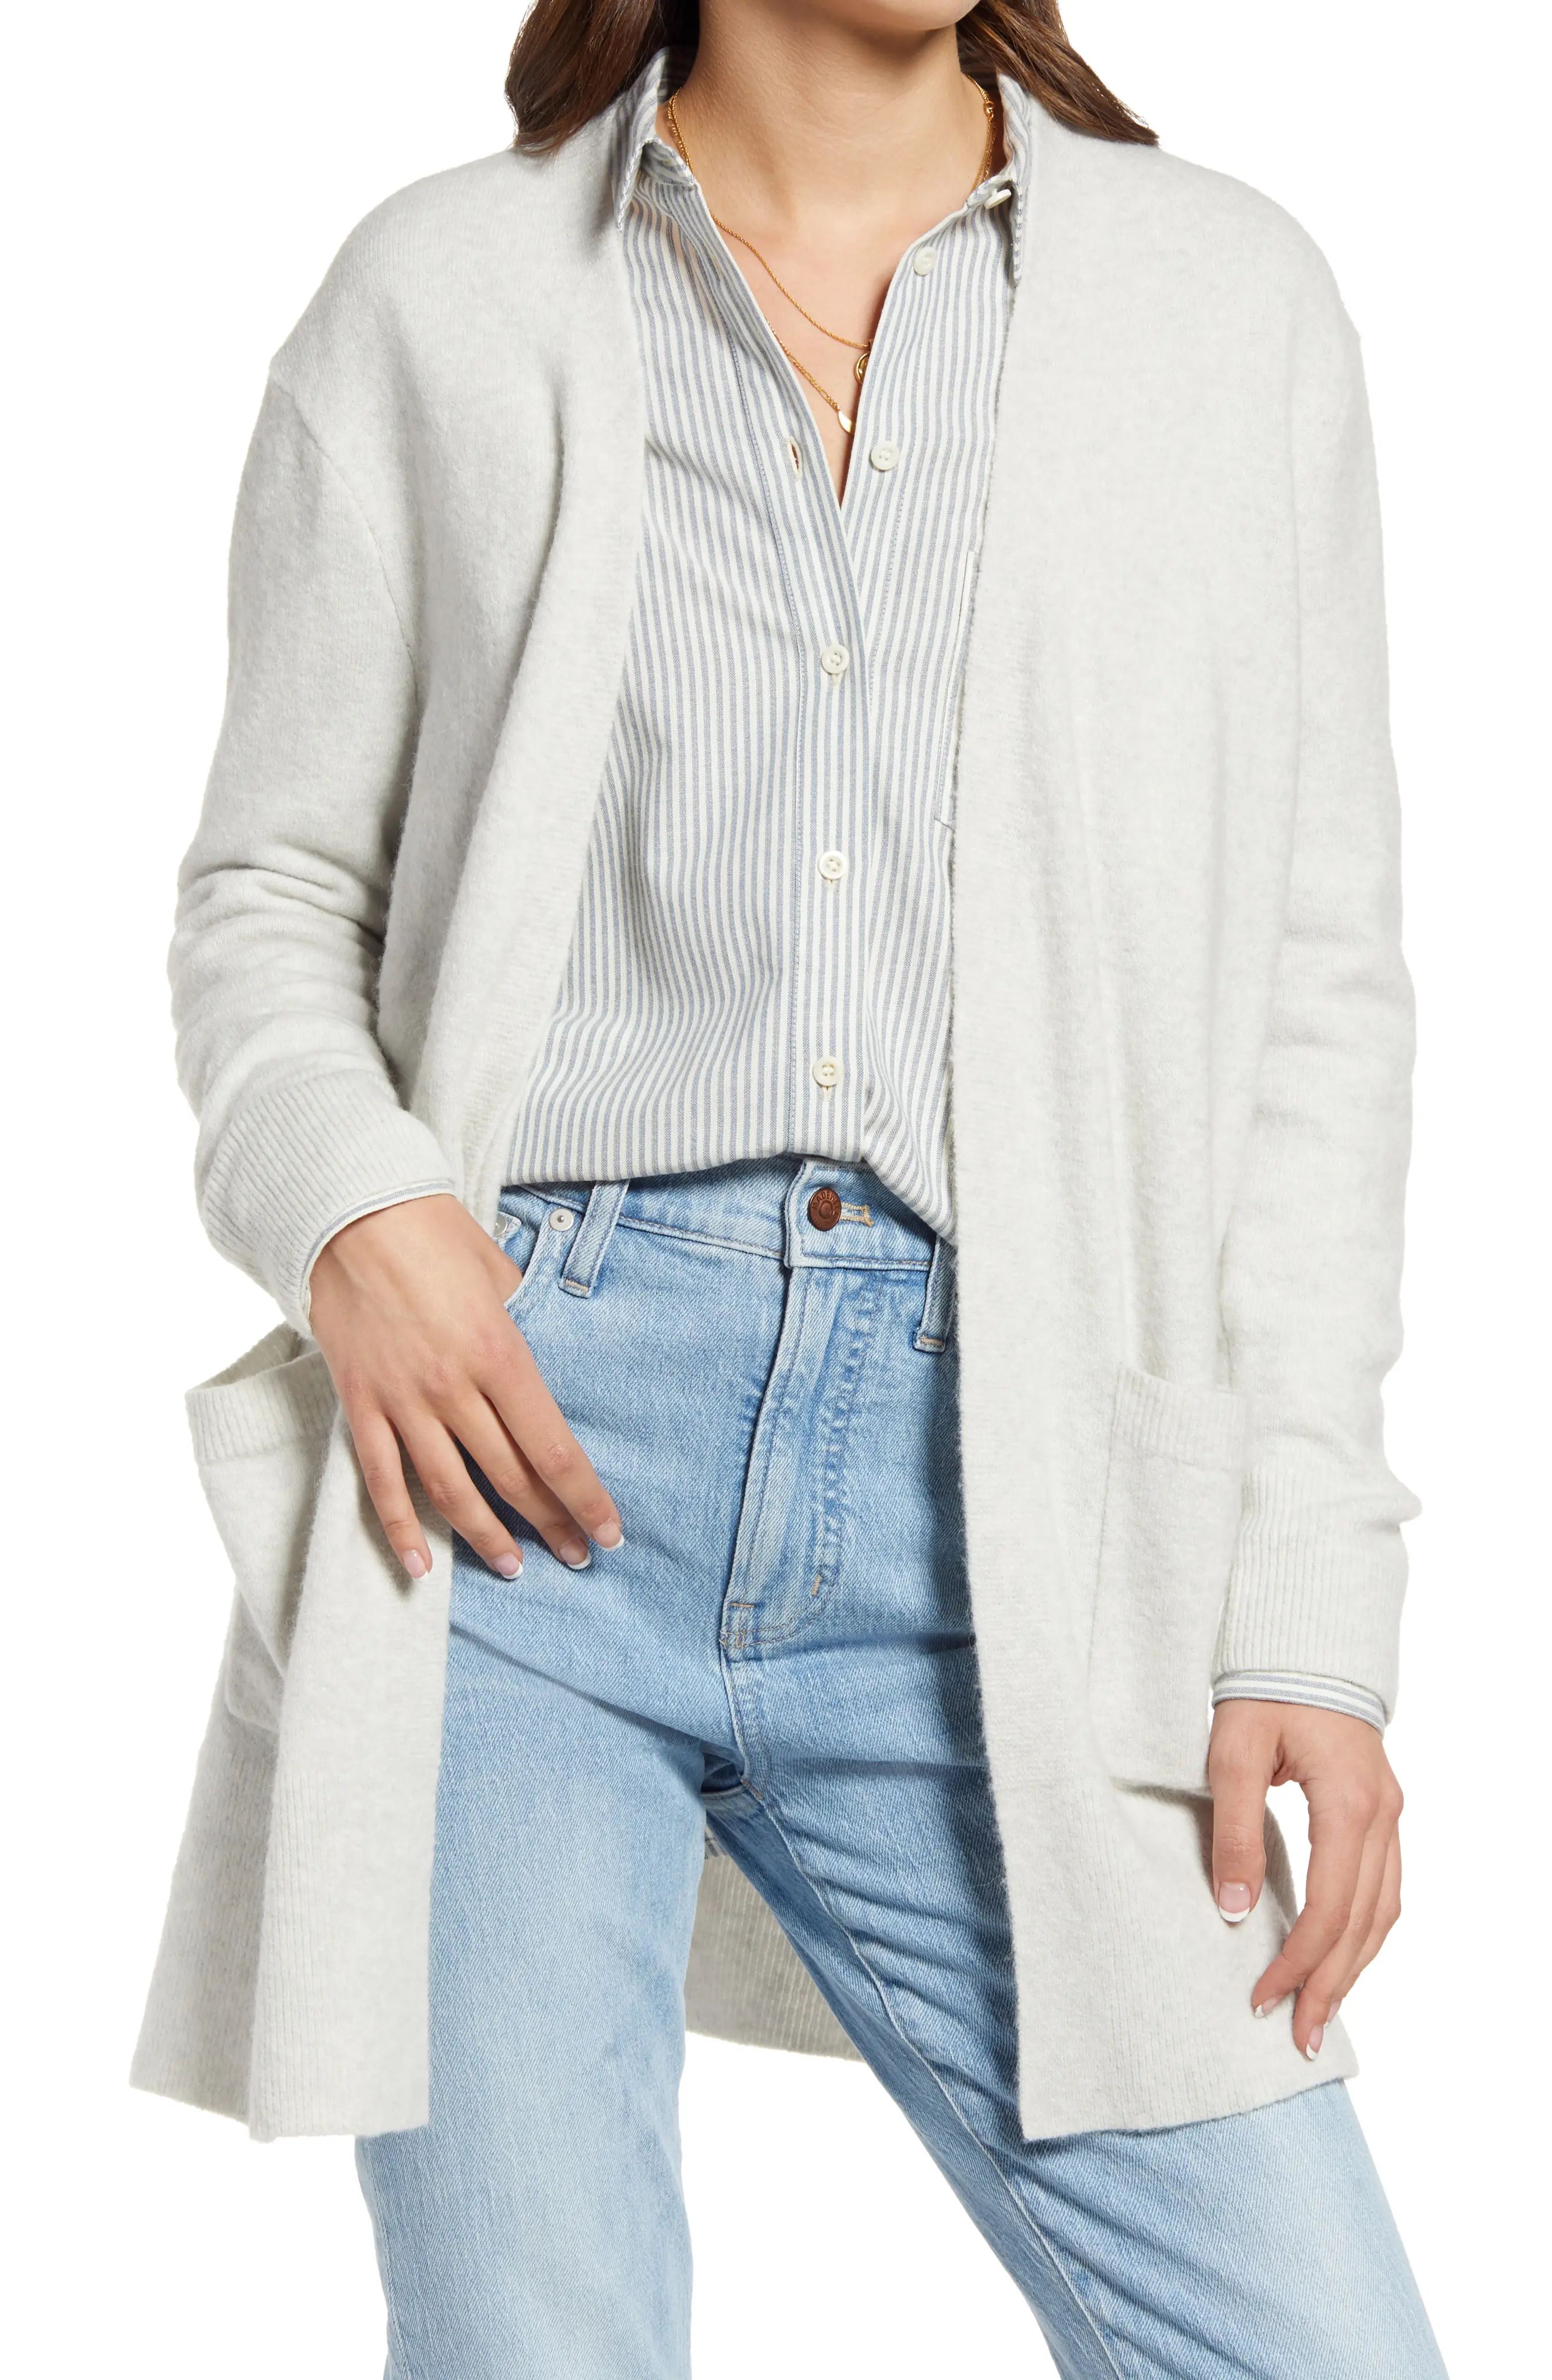 Madewell Kent Cardigan Sweater, Size Large in Heather Smoke at Nordstrom | Nordstrom